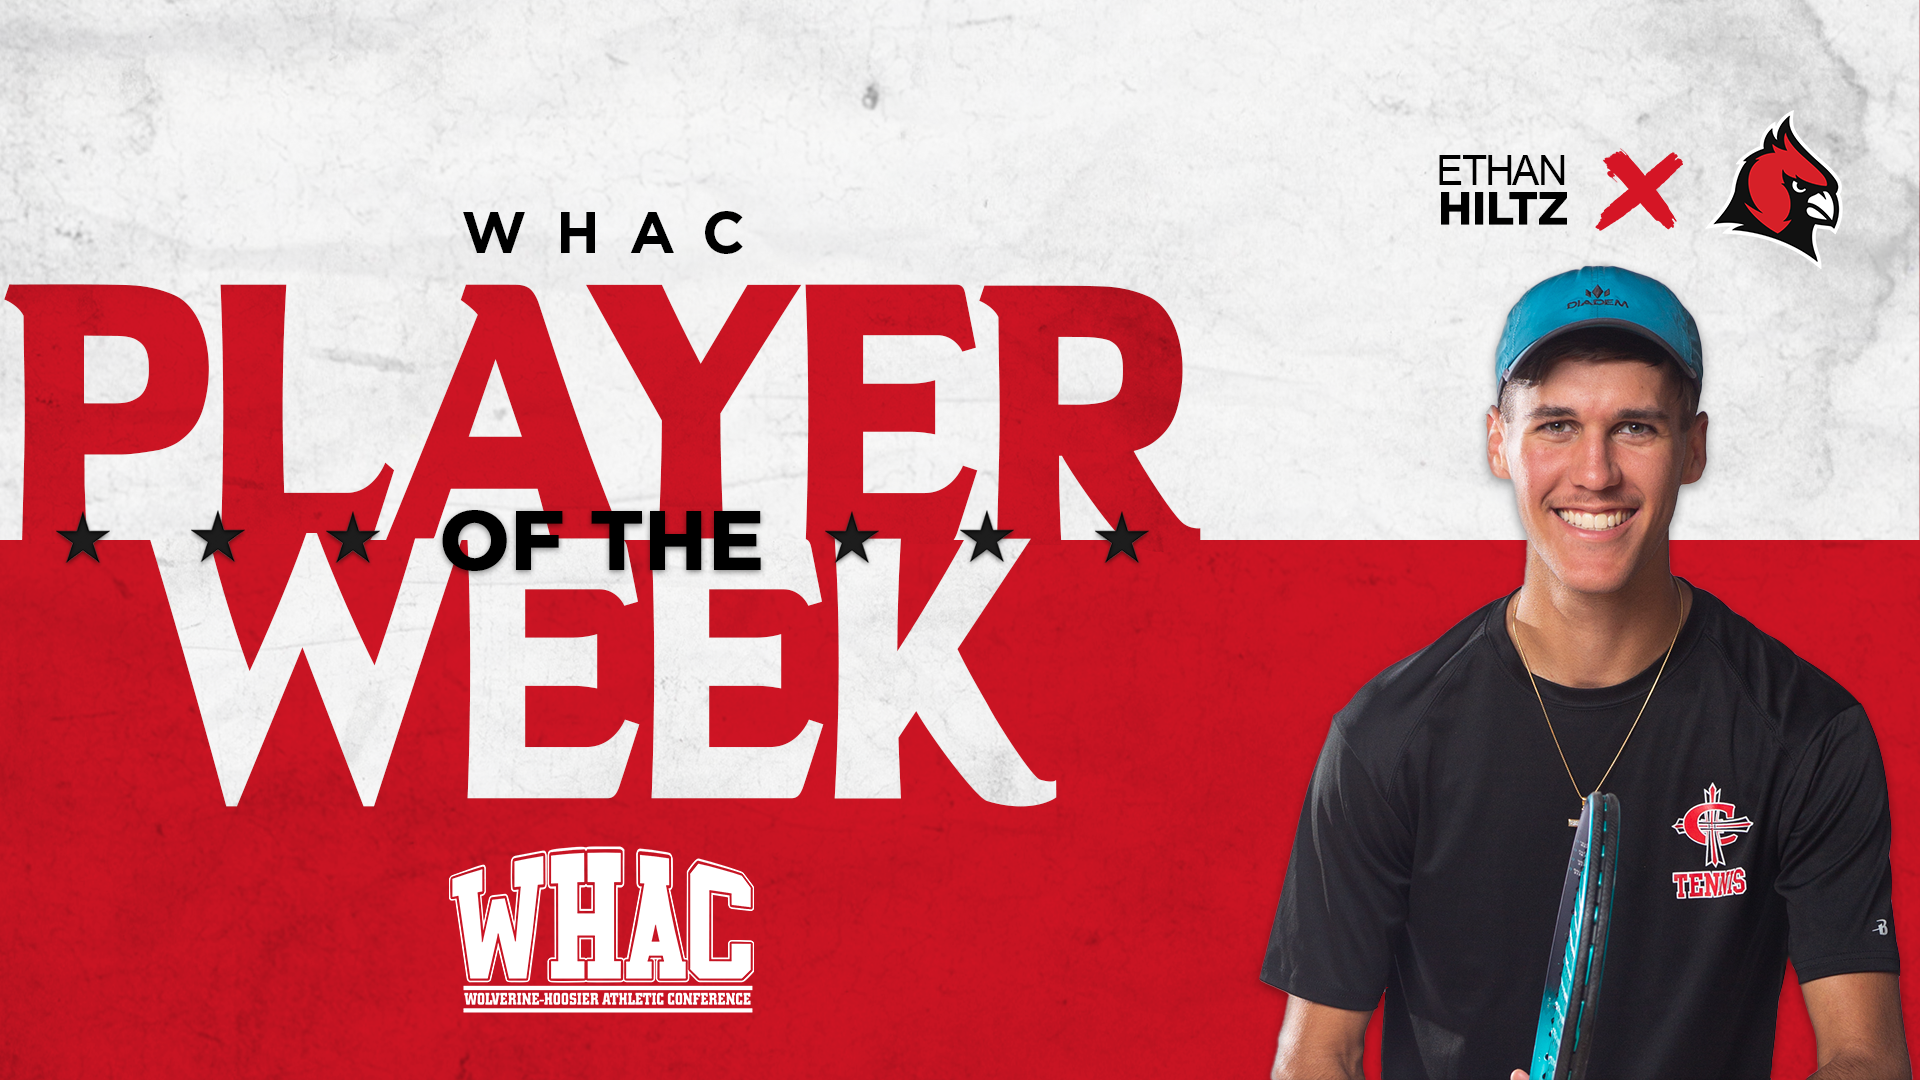 Men's Tennis' Hiltz takes home first WHAC Player of the Week honors